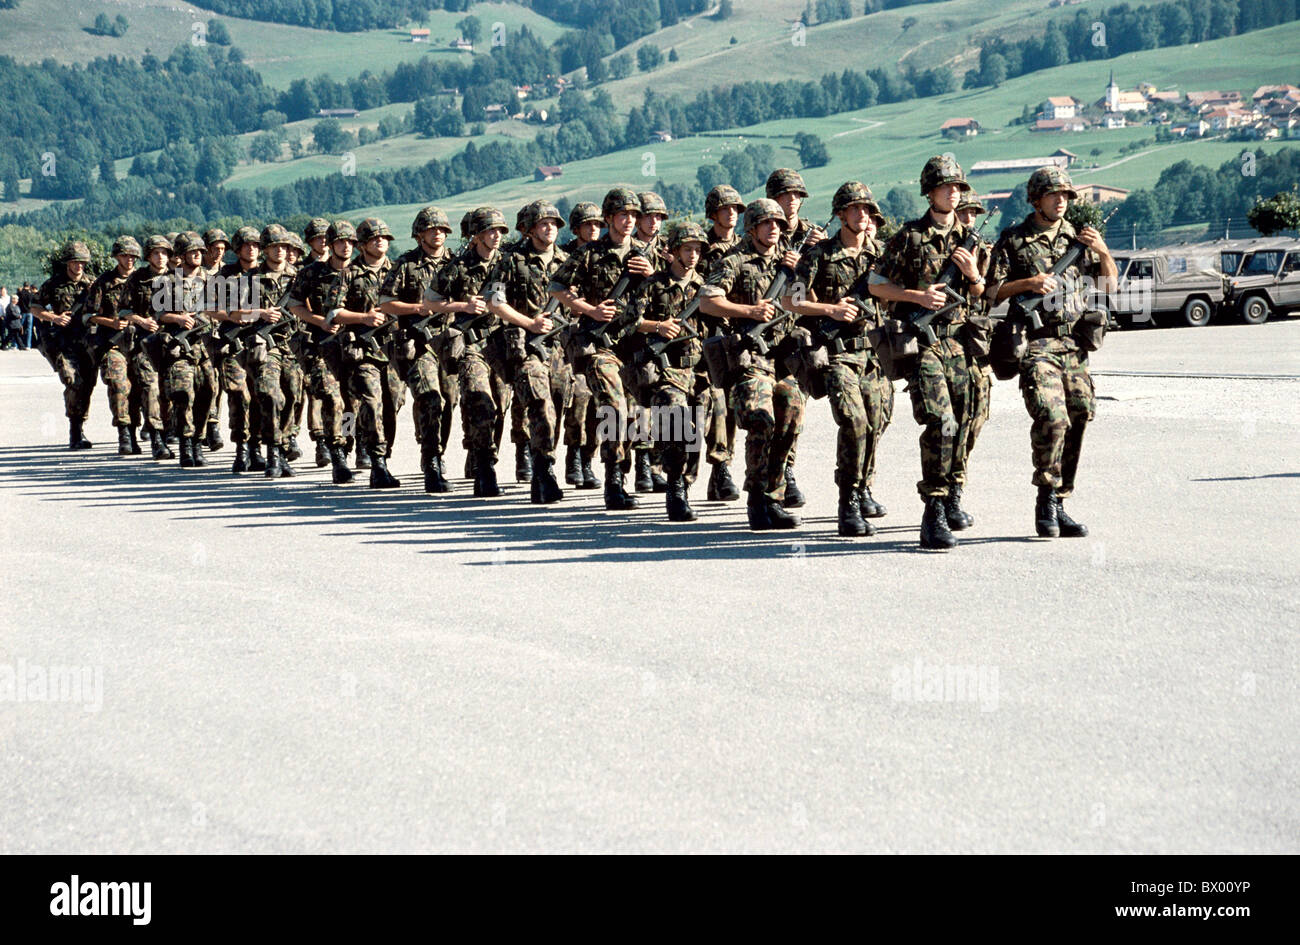 army military group men marsh march marching military no model release Switzerland Europe soldier unifor Stock Photo